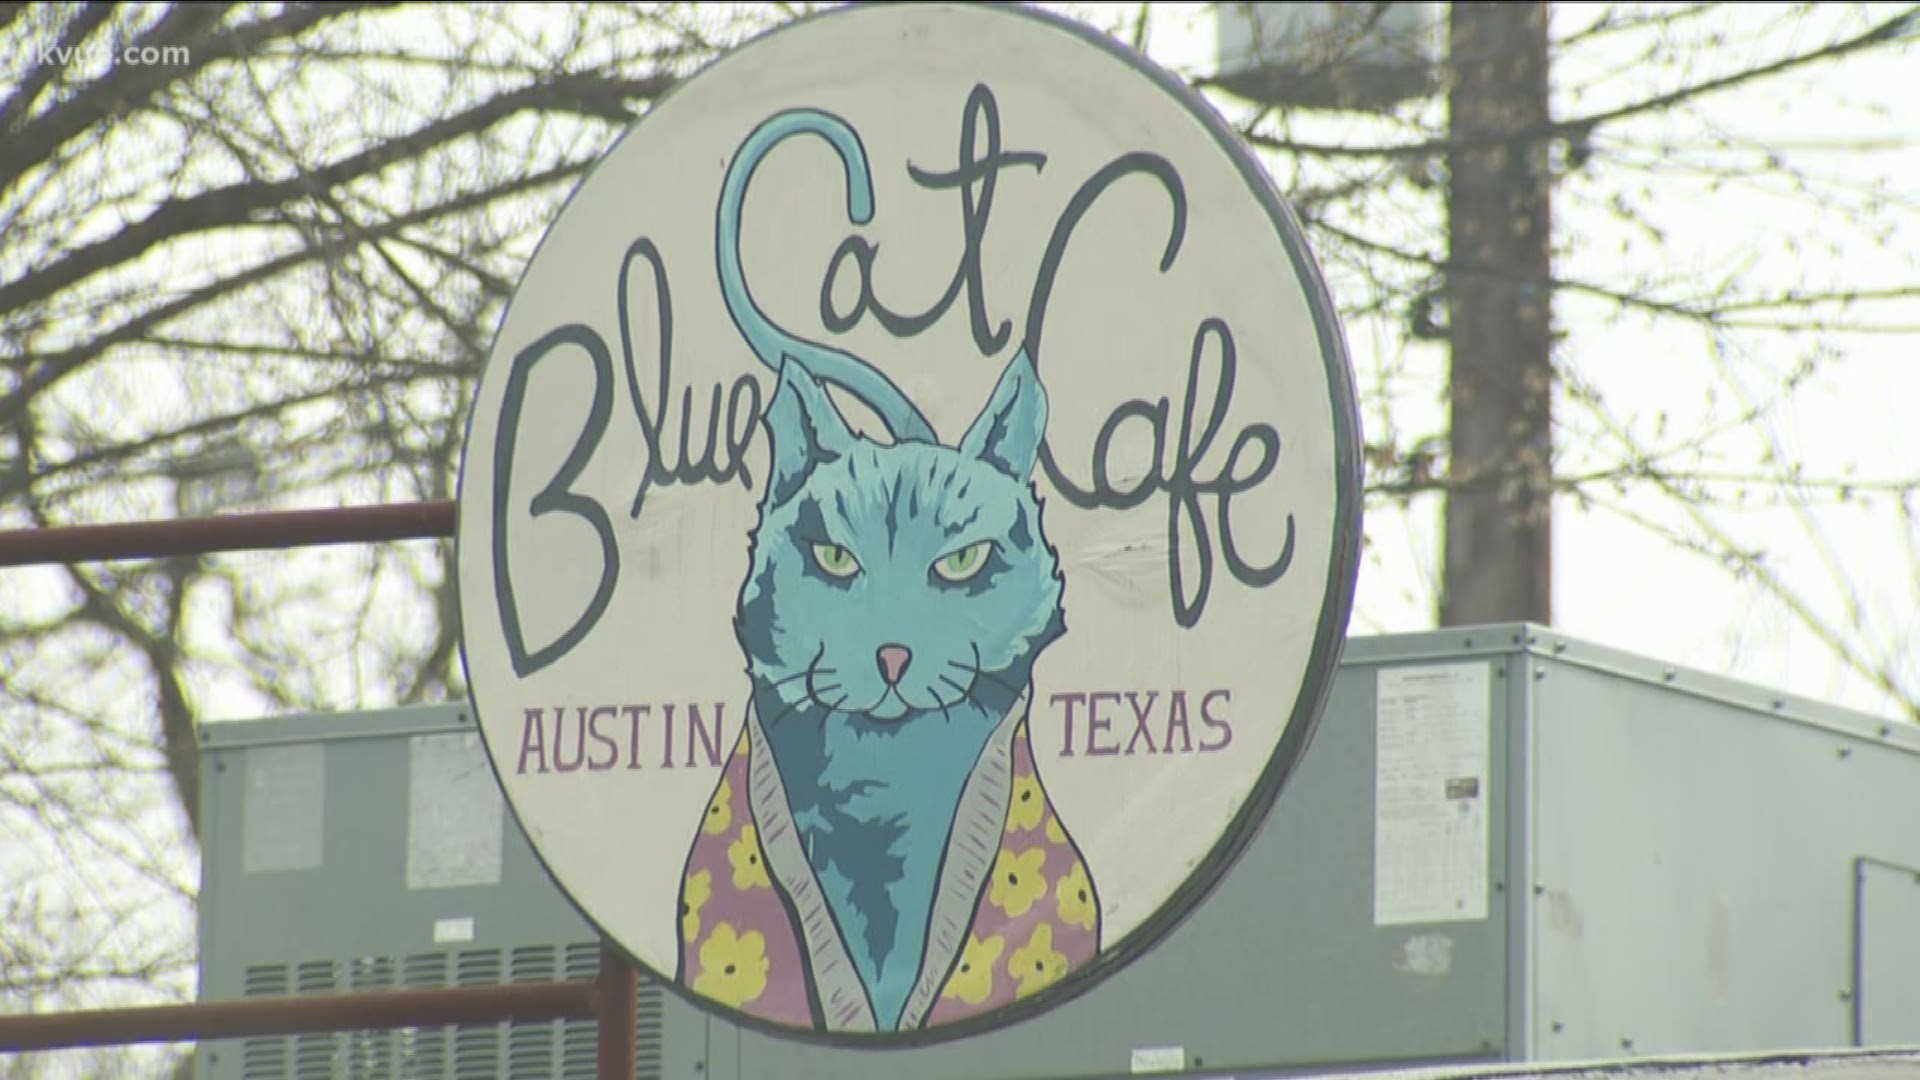 From the time Blue Cat Cafe opened to now, it has created mixed feelings among Austinites.